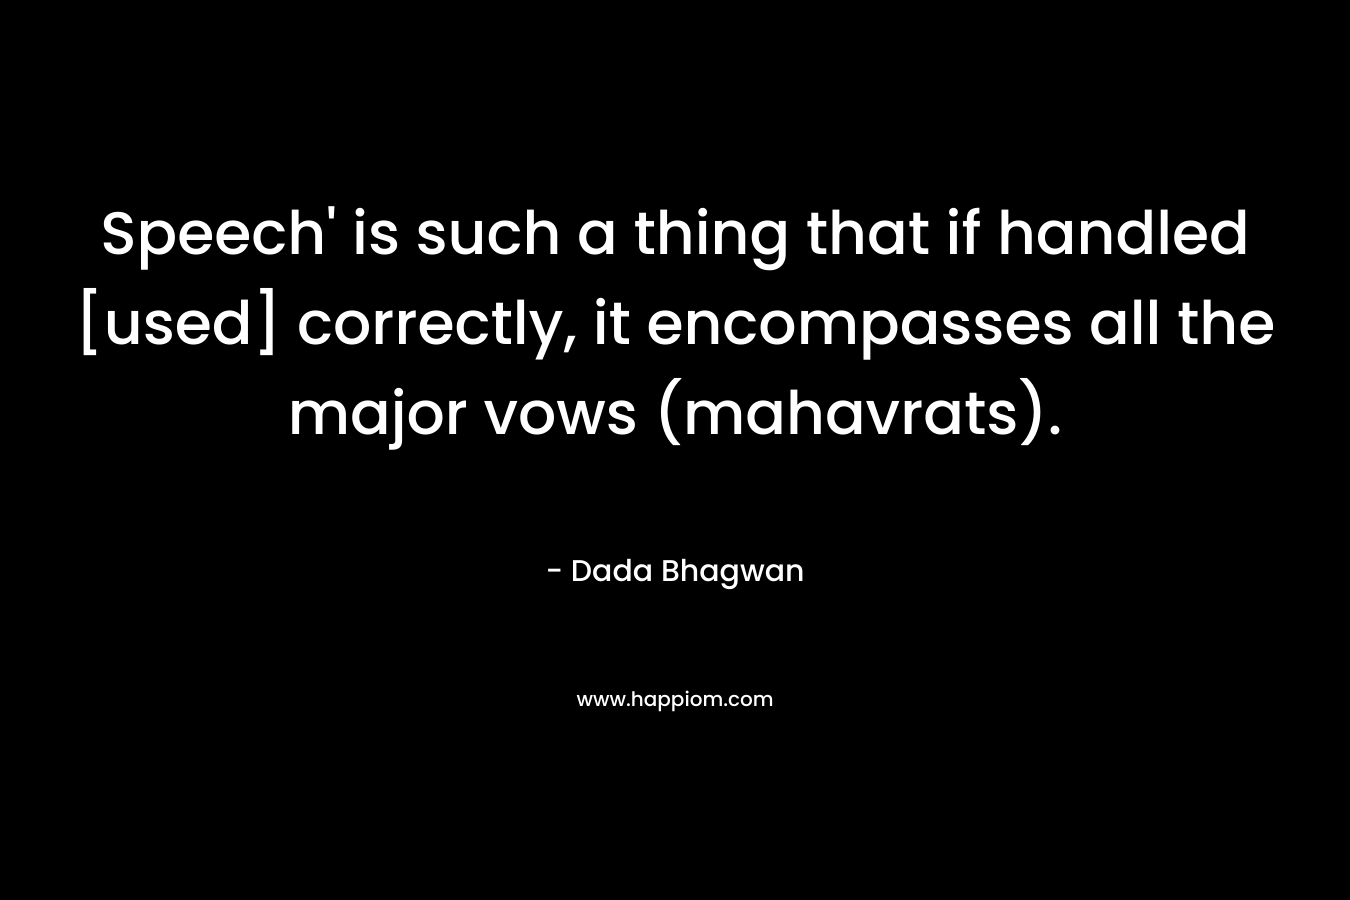 Speech’ is such a thing that if handled [used] correctly, it encompasses all the major vows (mahavrats). – Dada Bhagwan